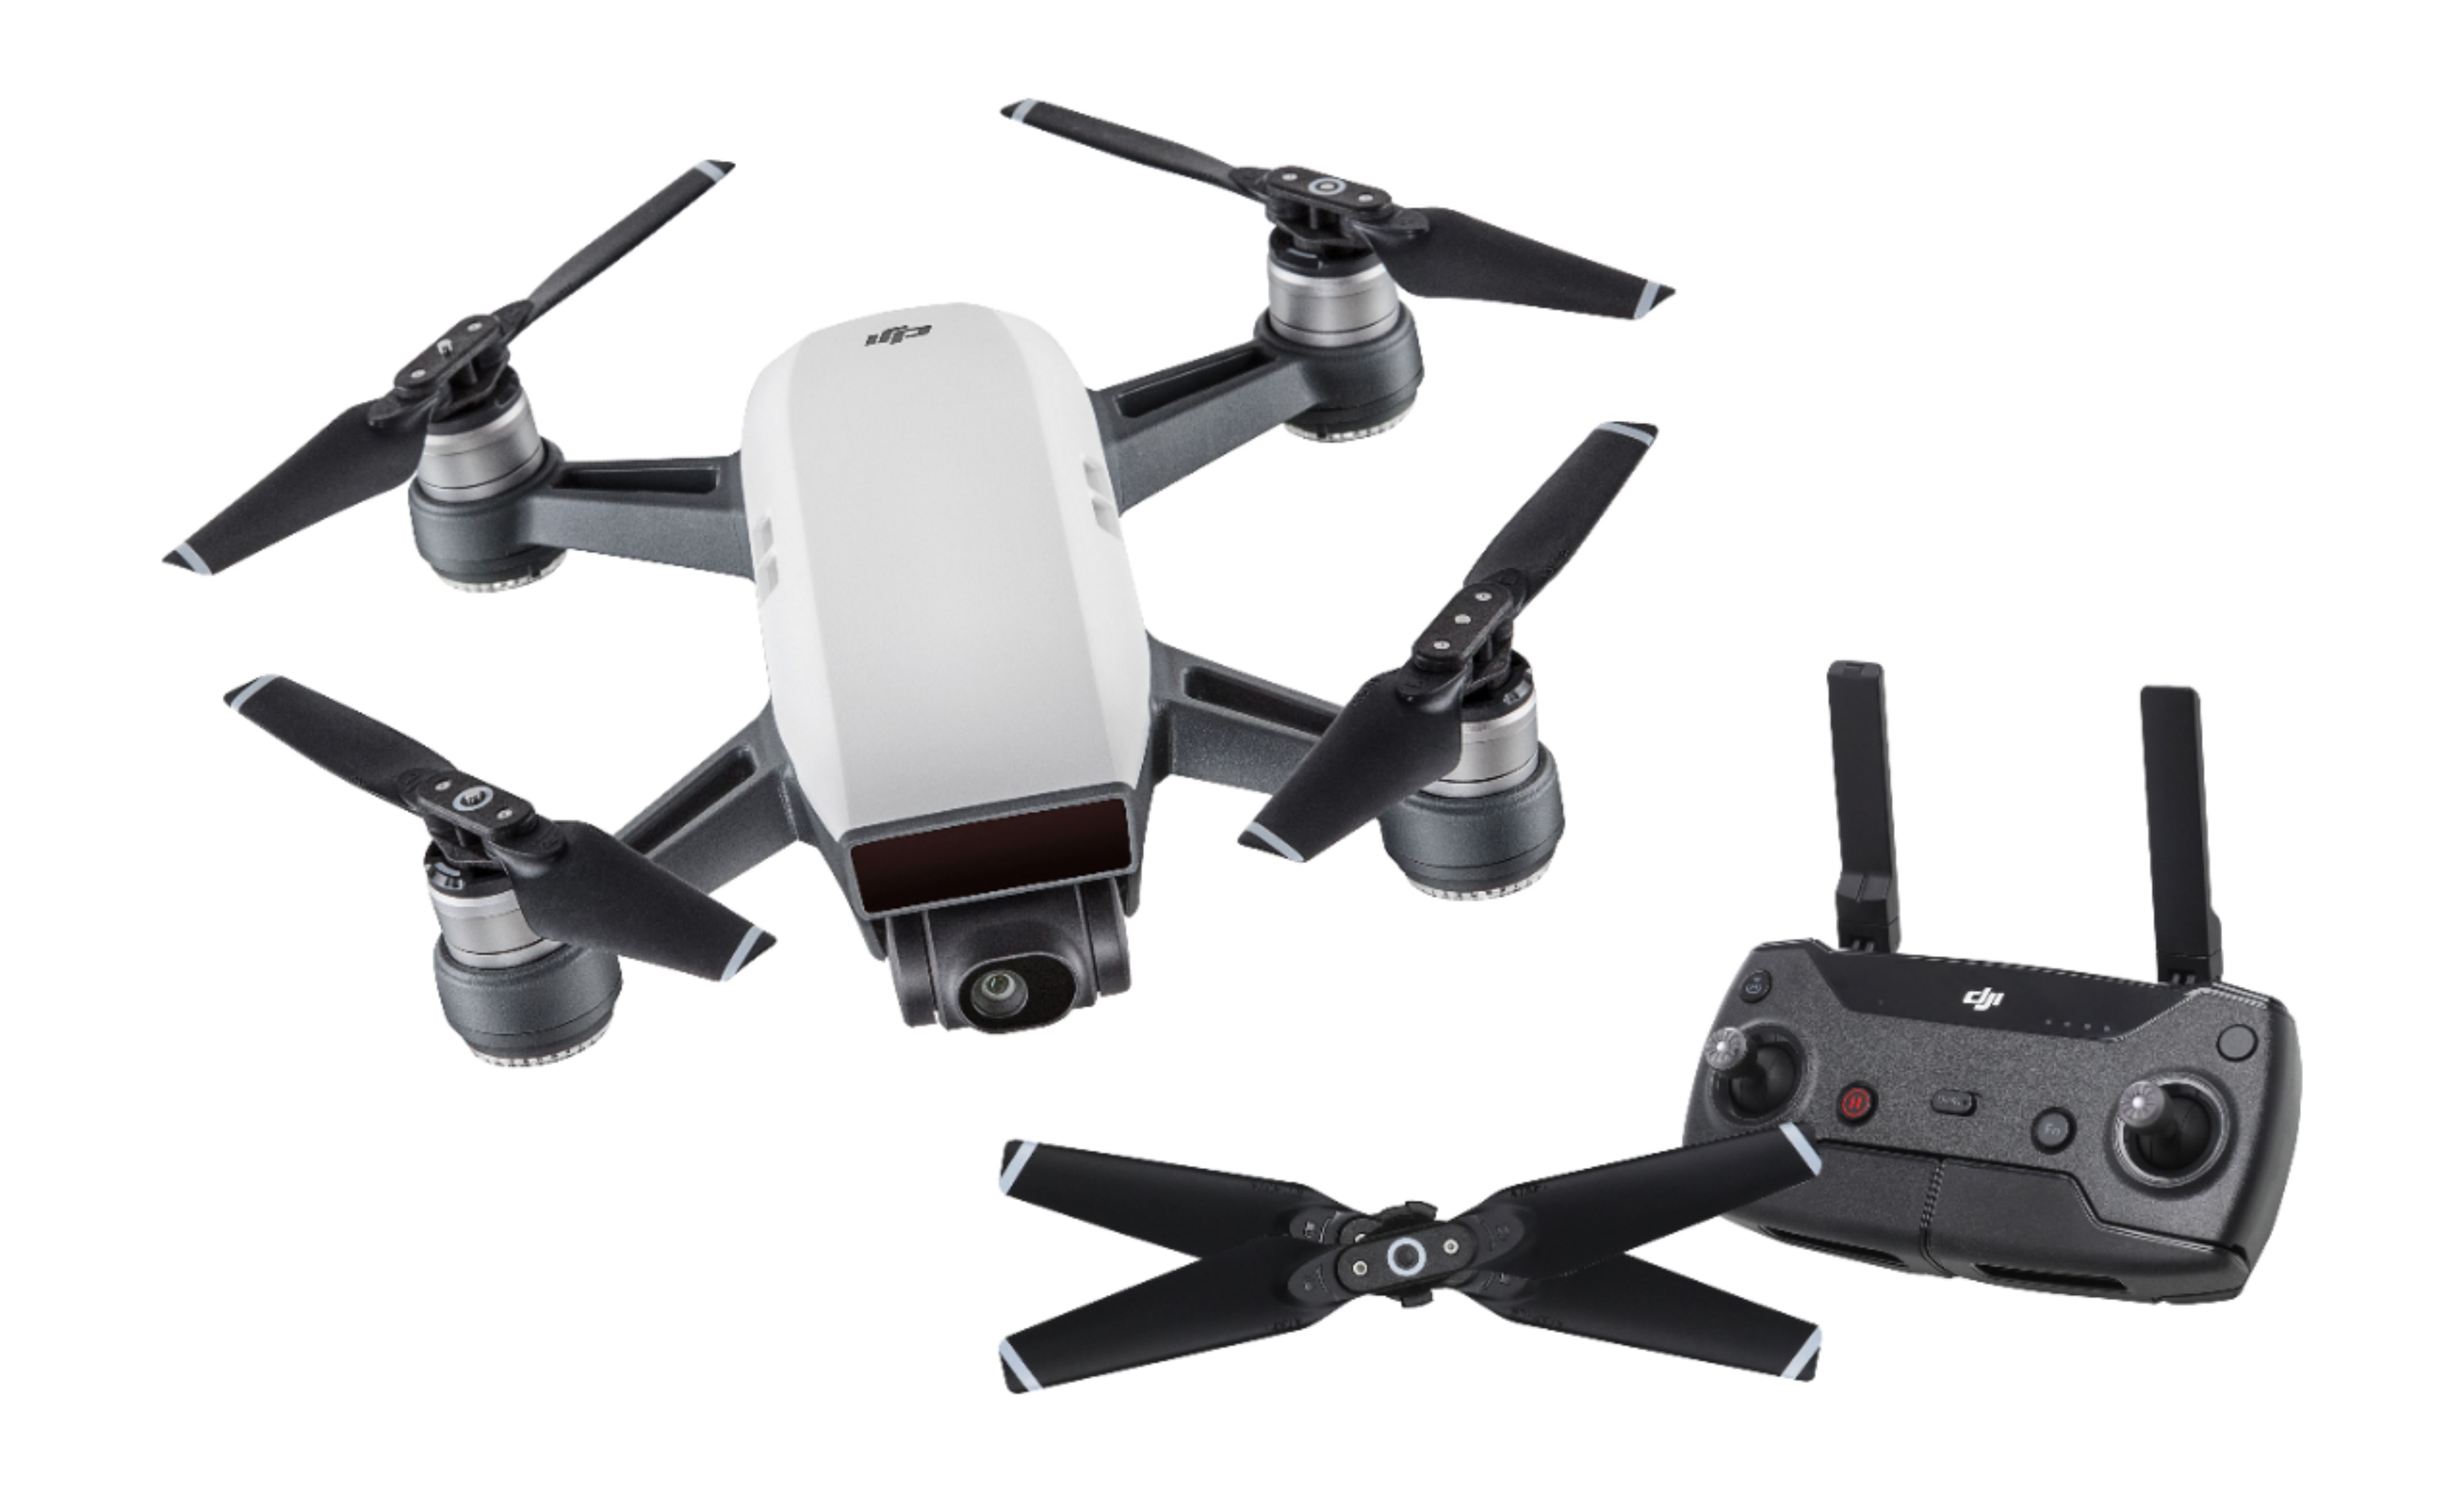 DJI Spark Fly More Combo Drone - White